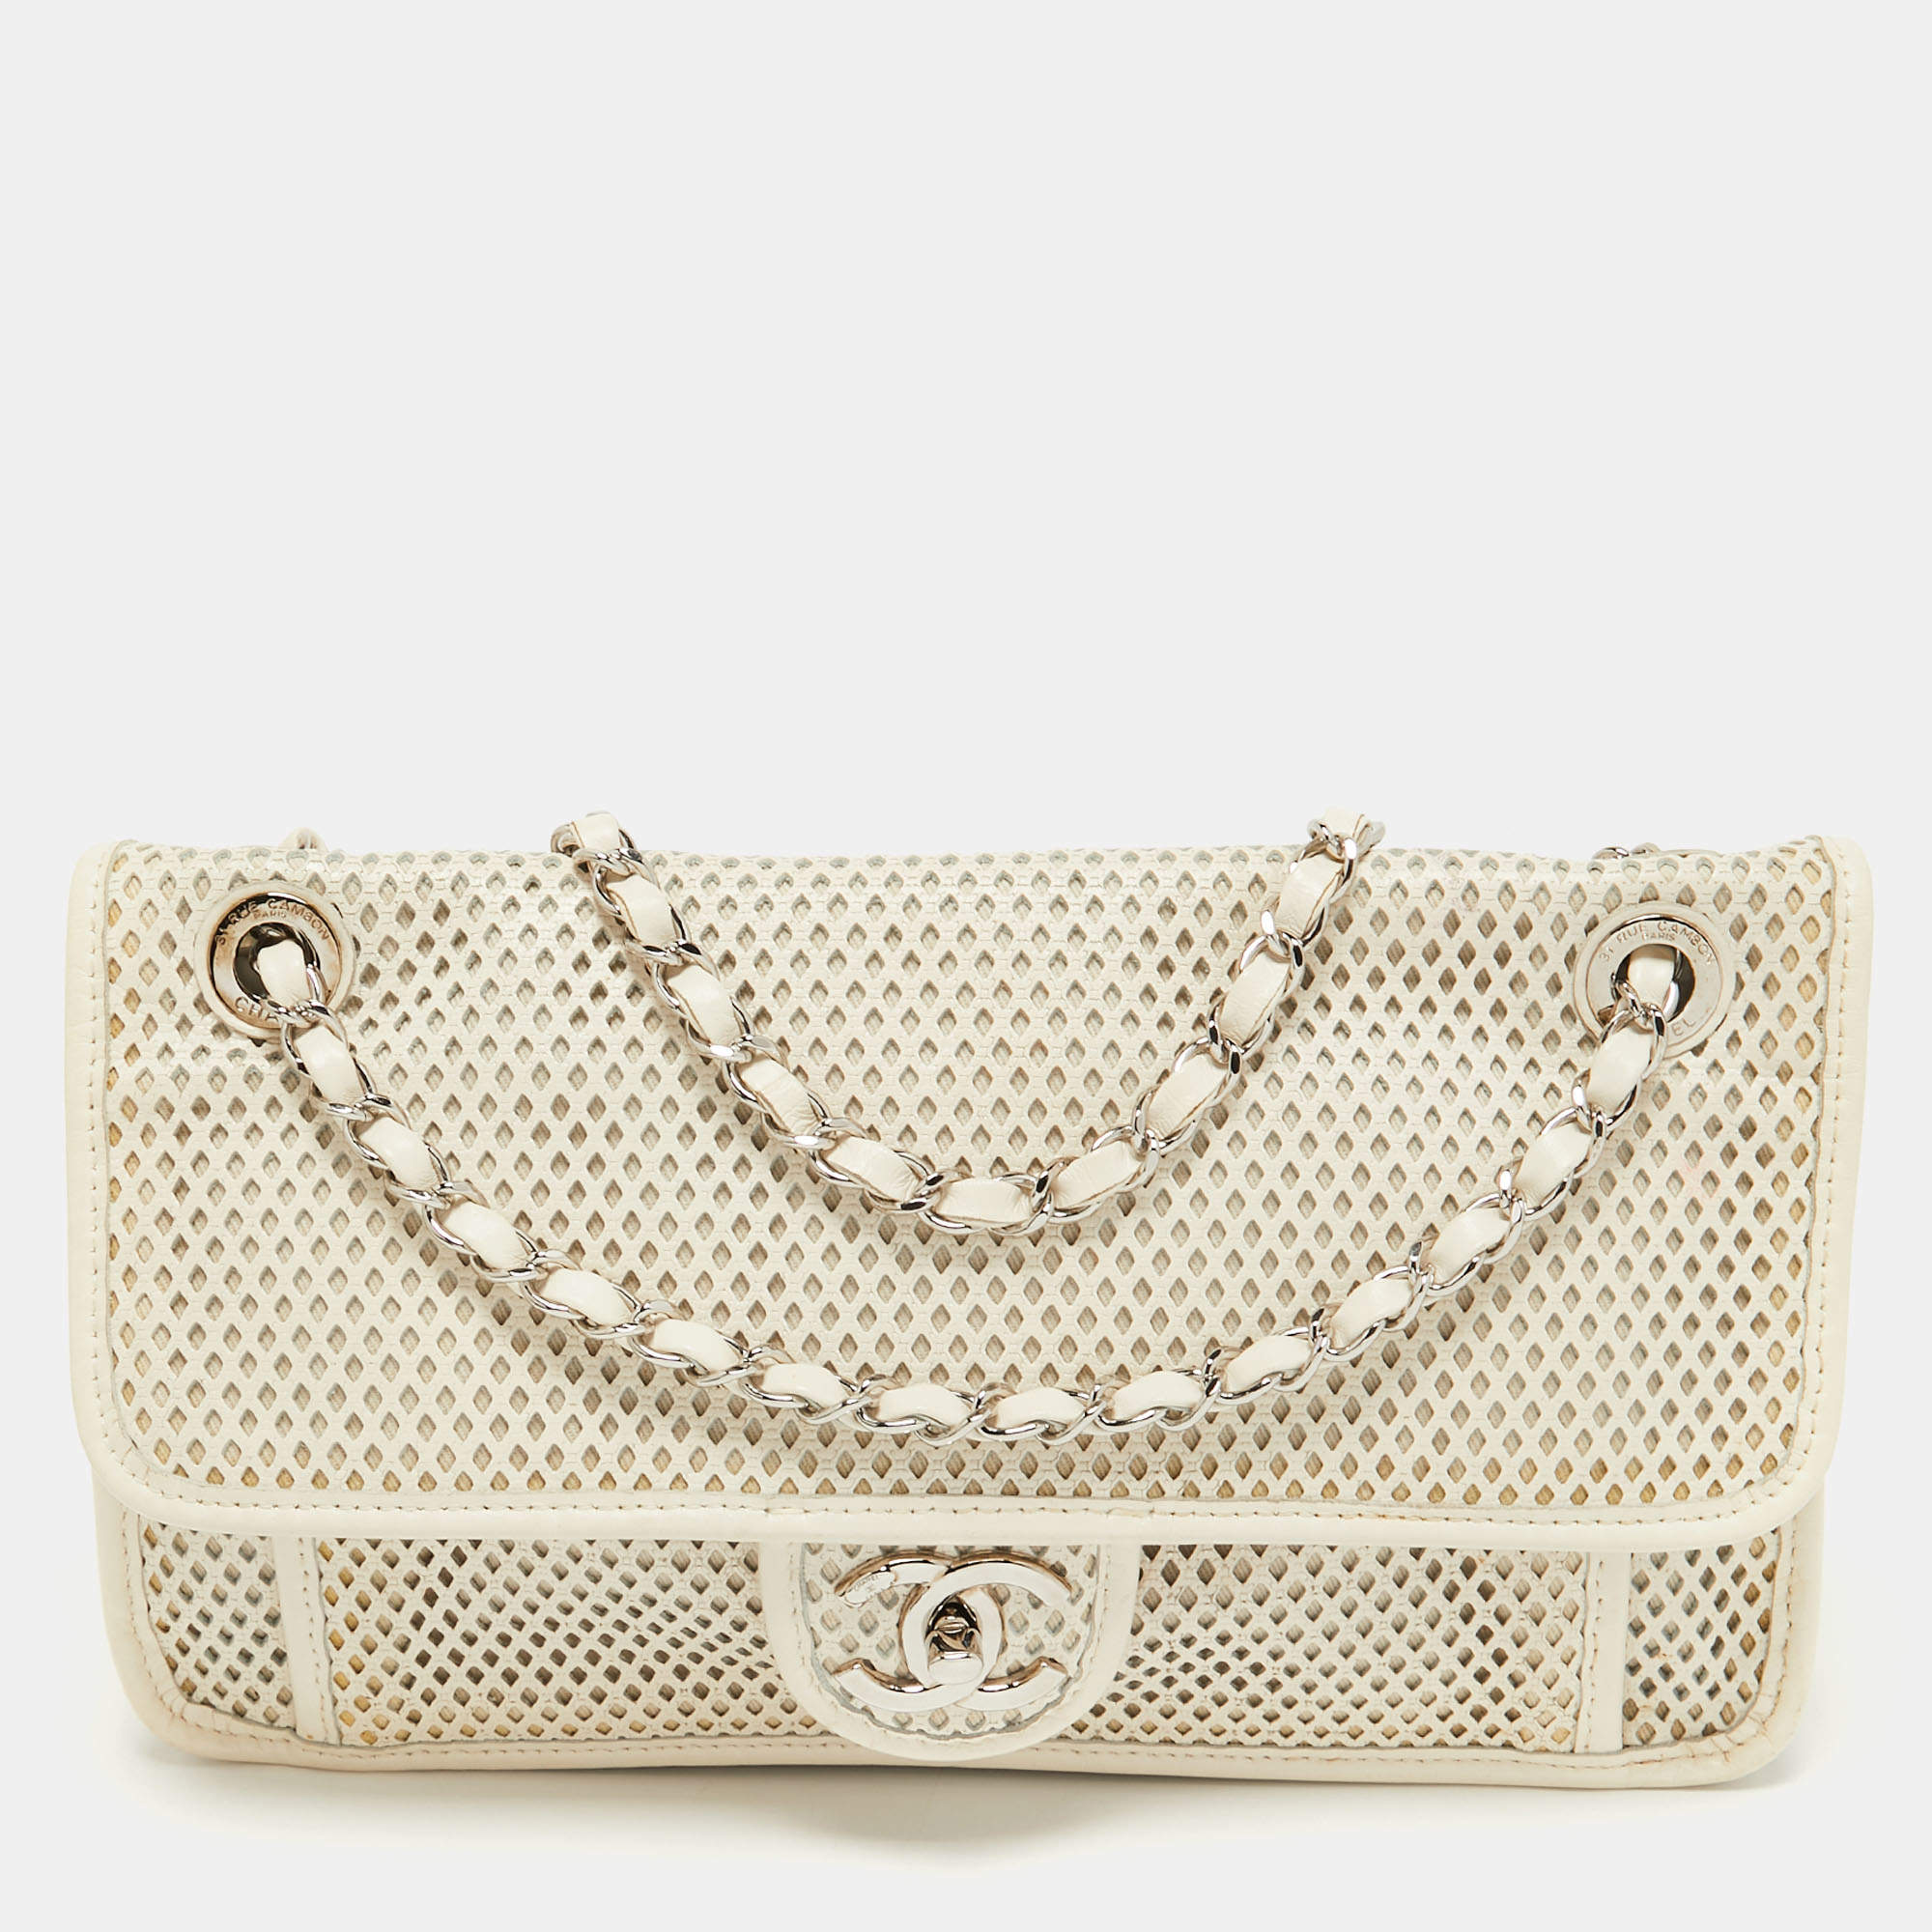 CHANEL Metallic Perforated Calfskin Small Up In The Air Flap Light